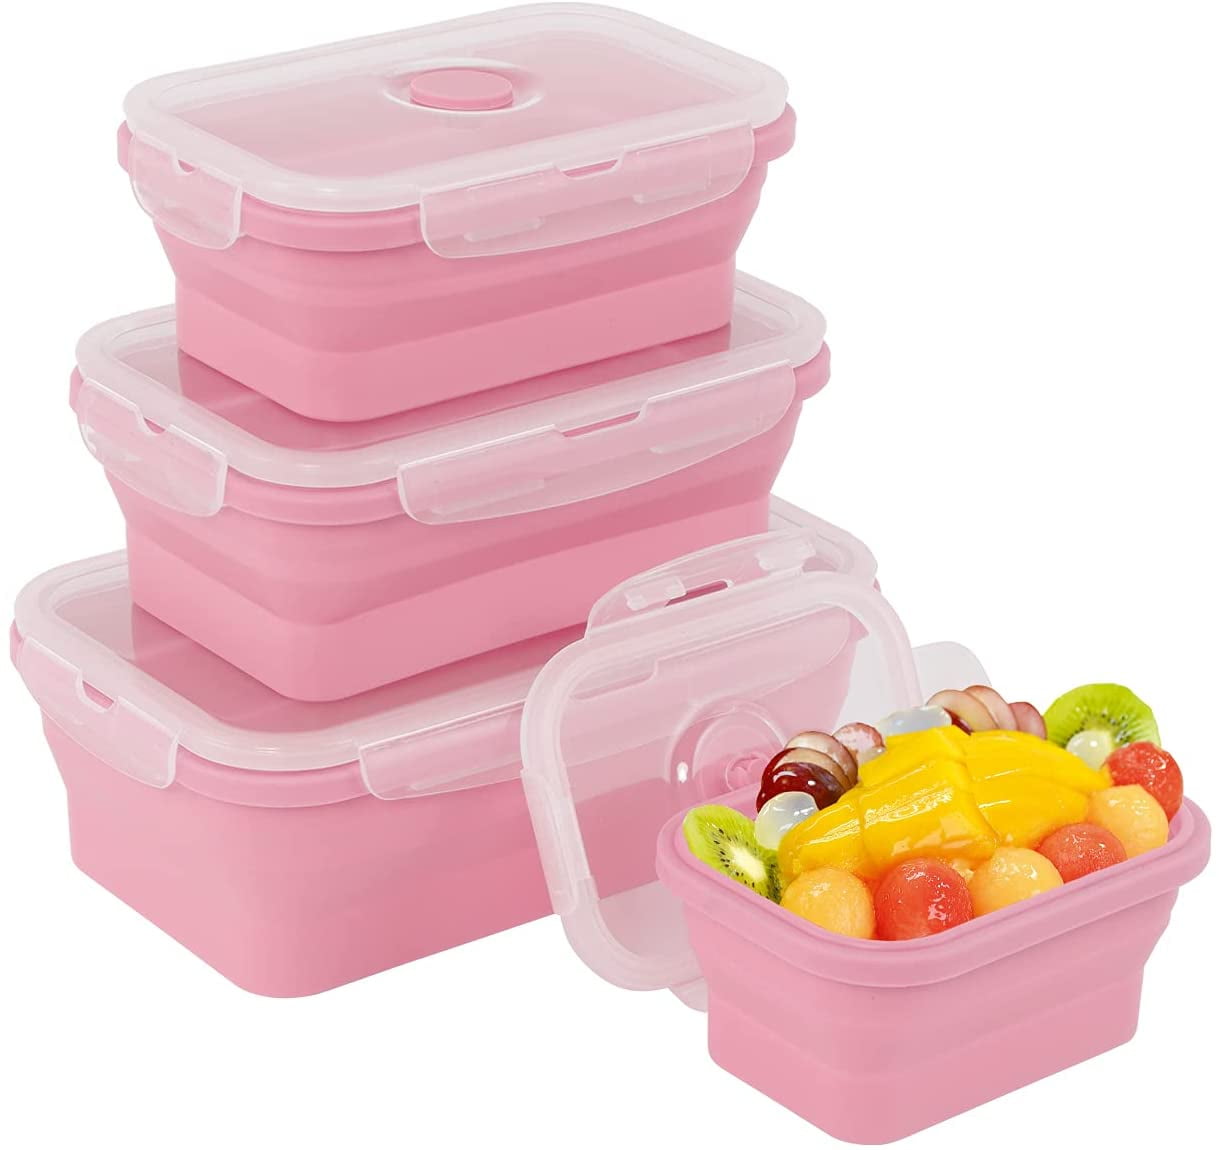 4 pcs Silicone Foldable Meal Prep Container Lunch Box Food Storage Takeaway 